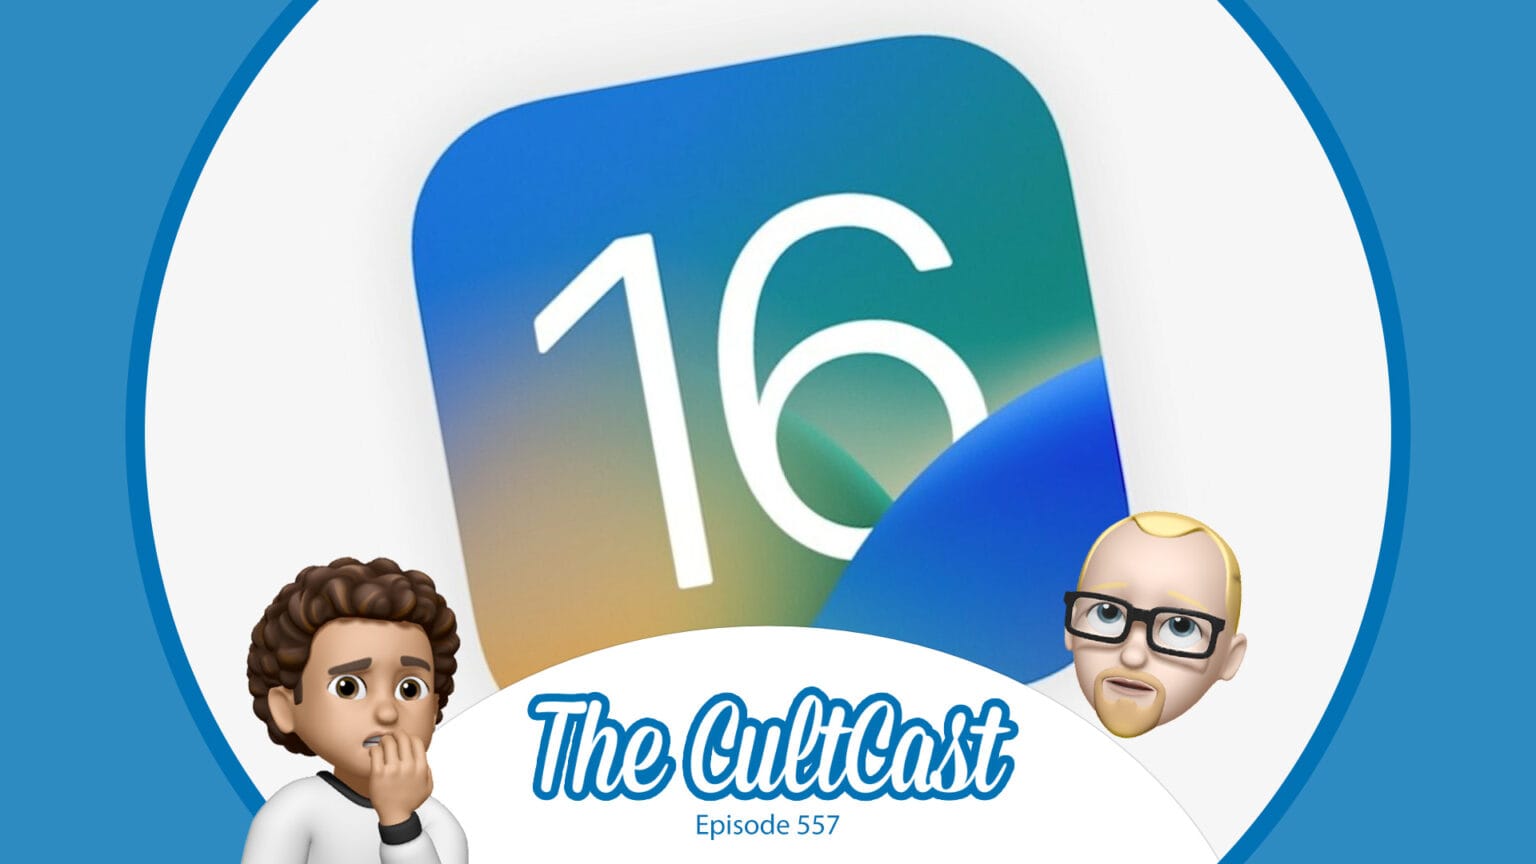 Cultcast Podcasts: iOS 16 is almost here, but we'll be disappointed if Apple doesn't polish these two things.